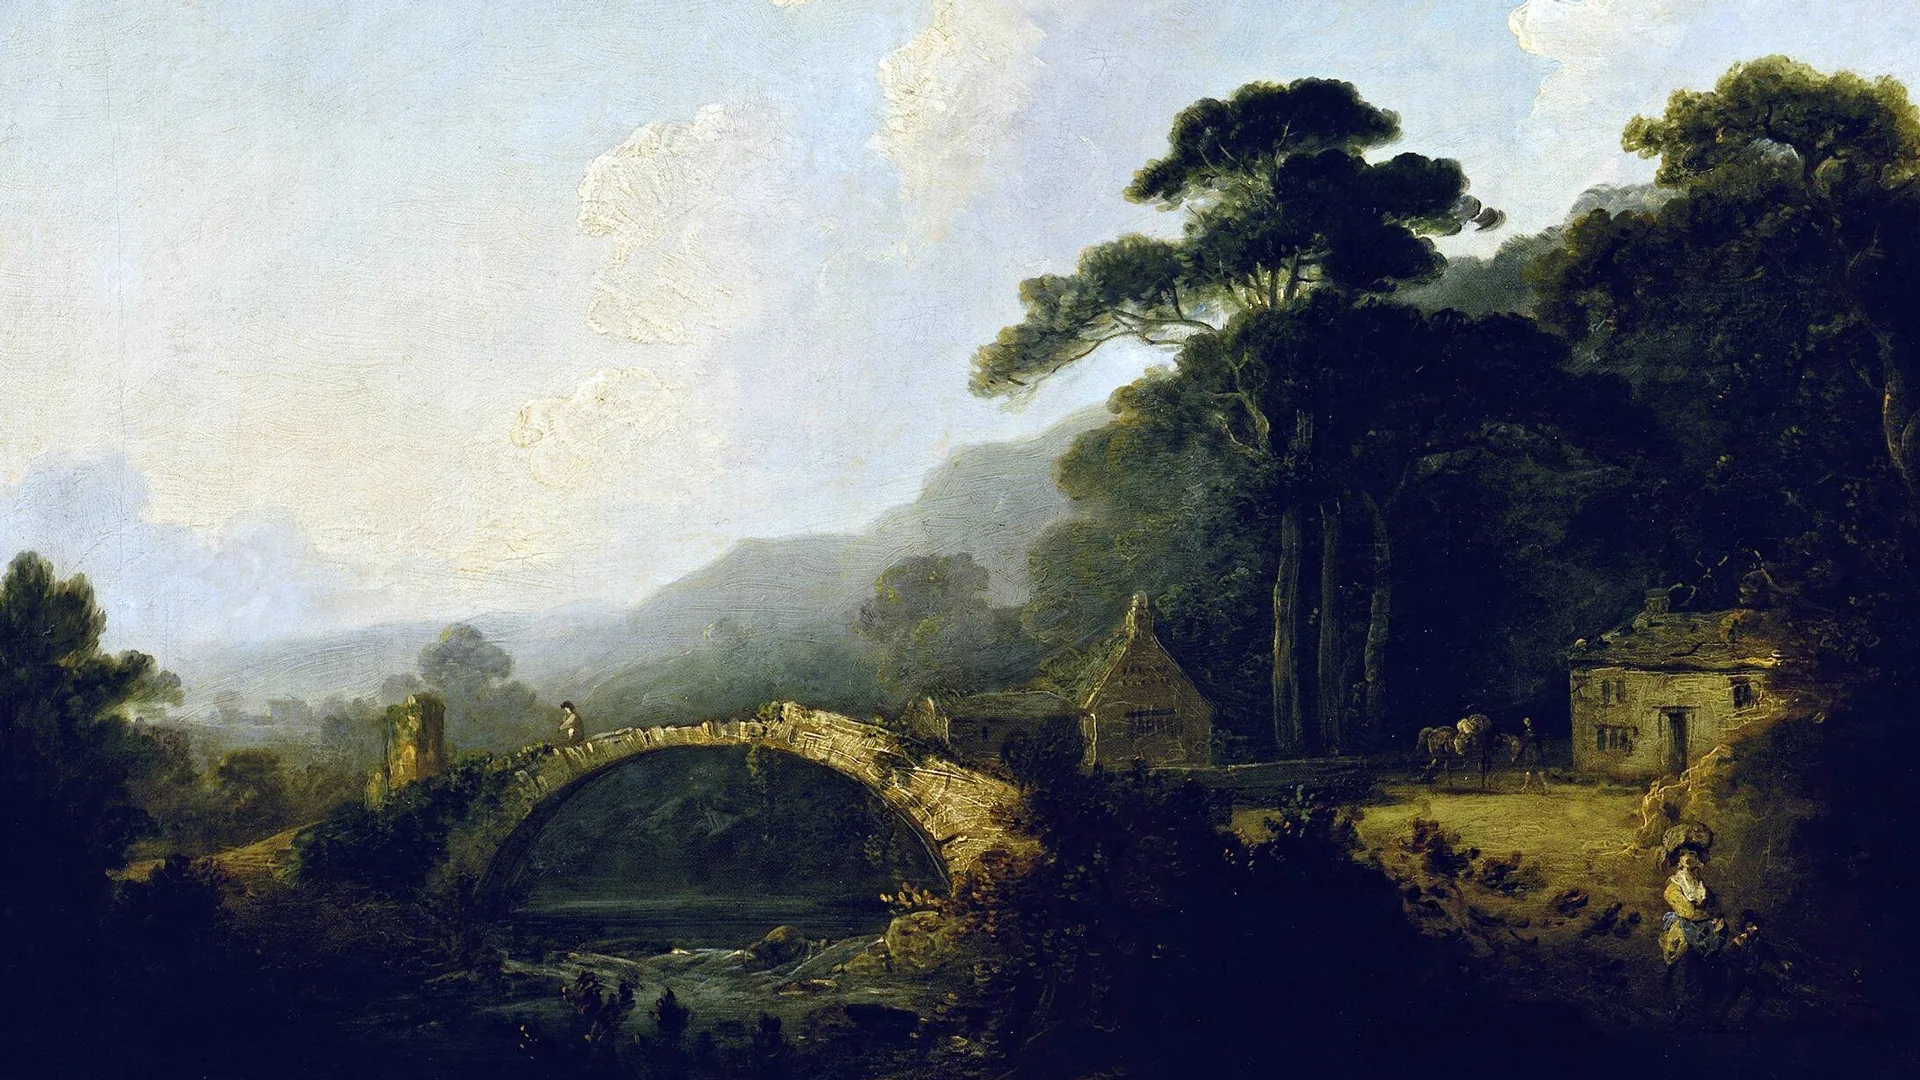 A 19th century painting showing a bridge next to a big tree with hills in the background. The colours are very dark except for the blue sky with vanilla shaded clouds.